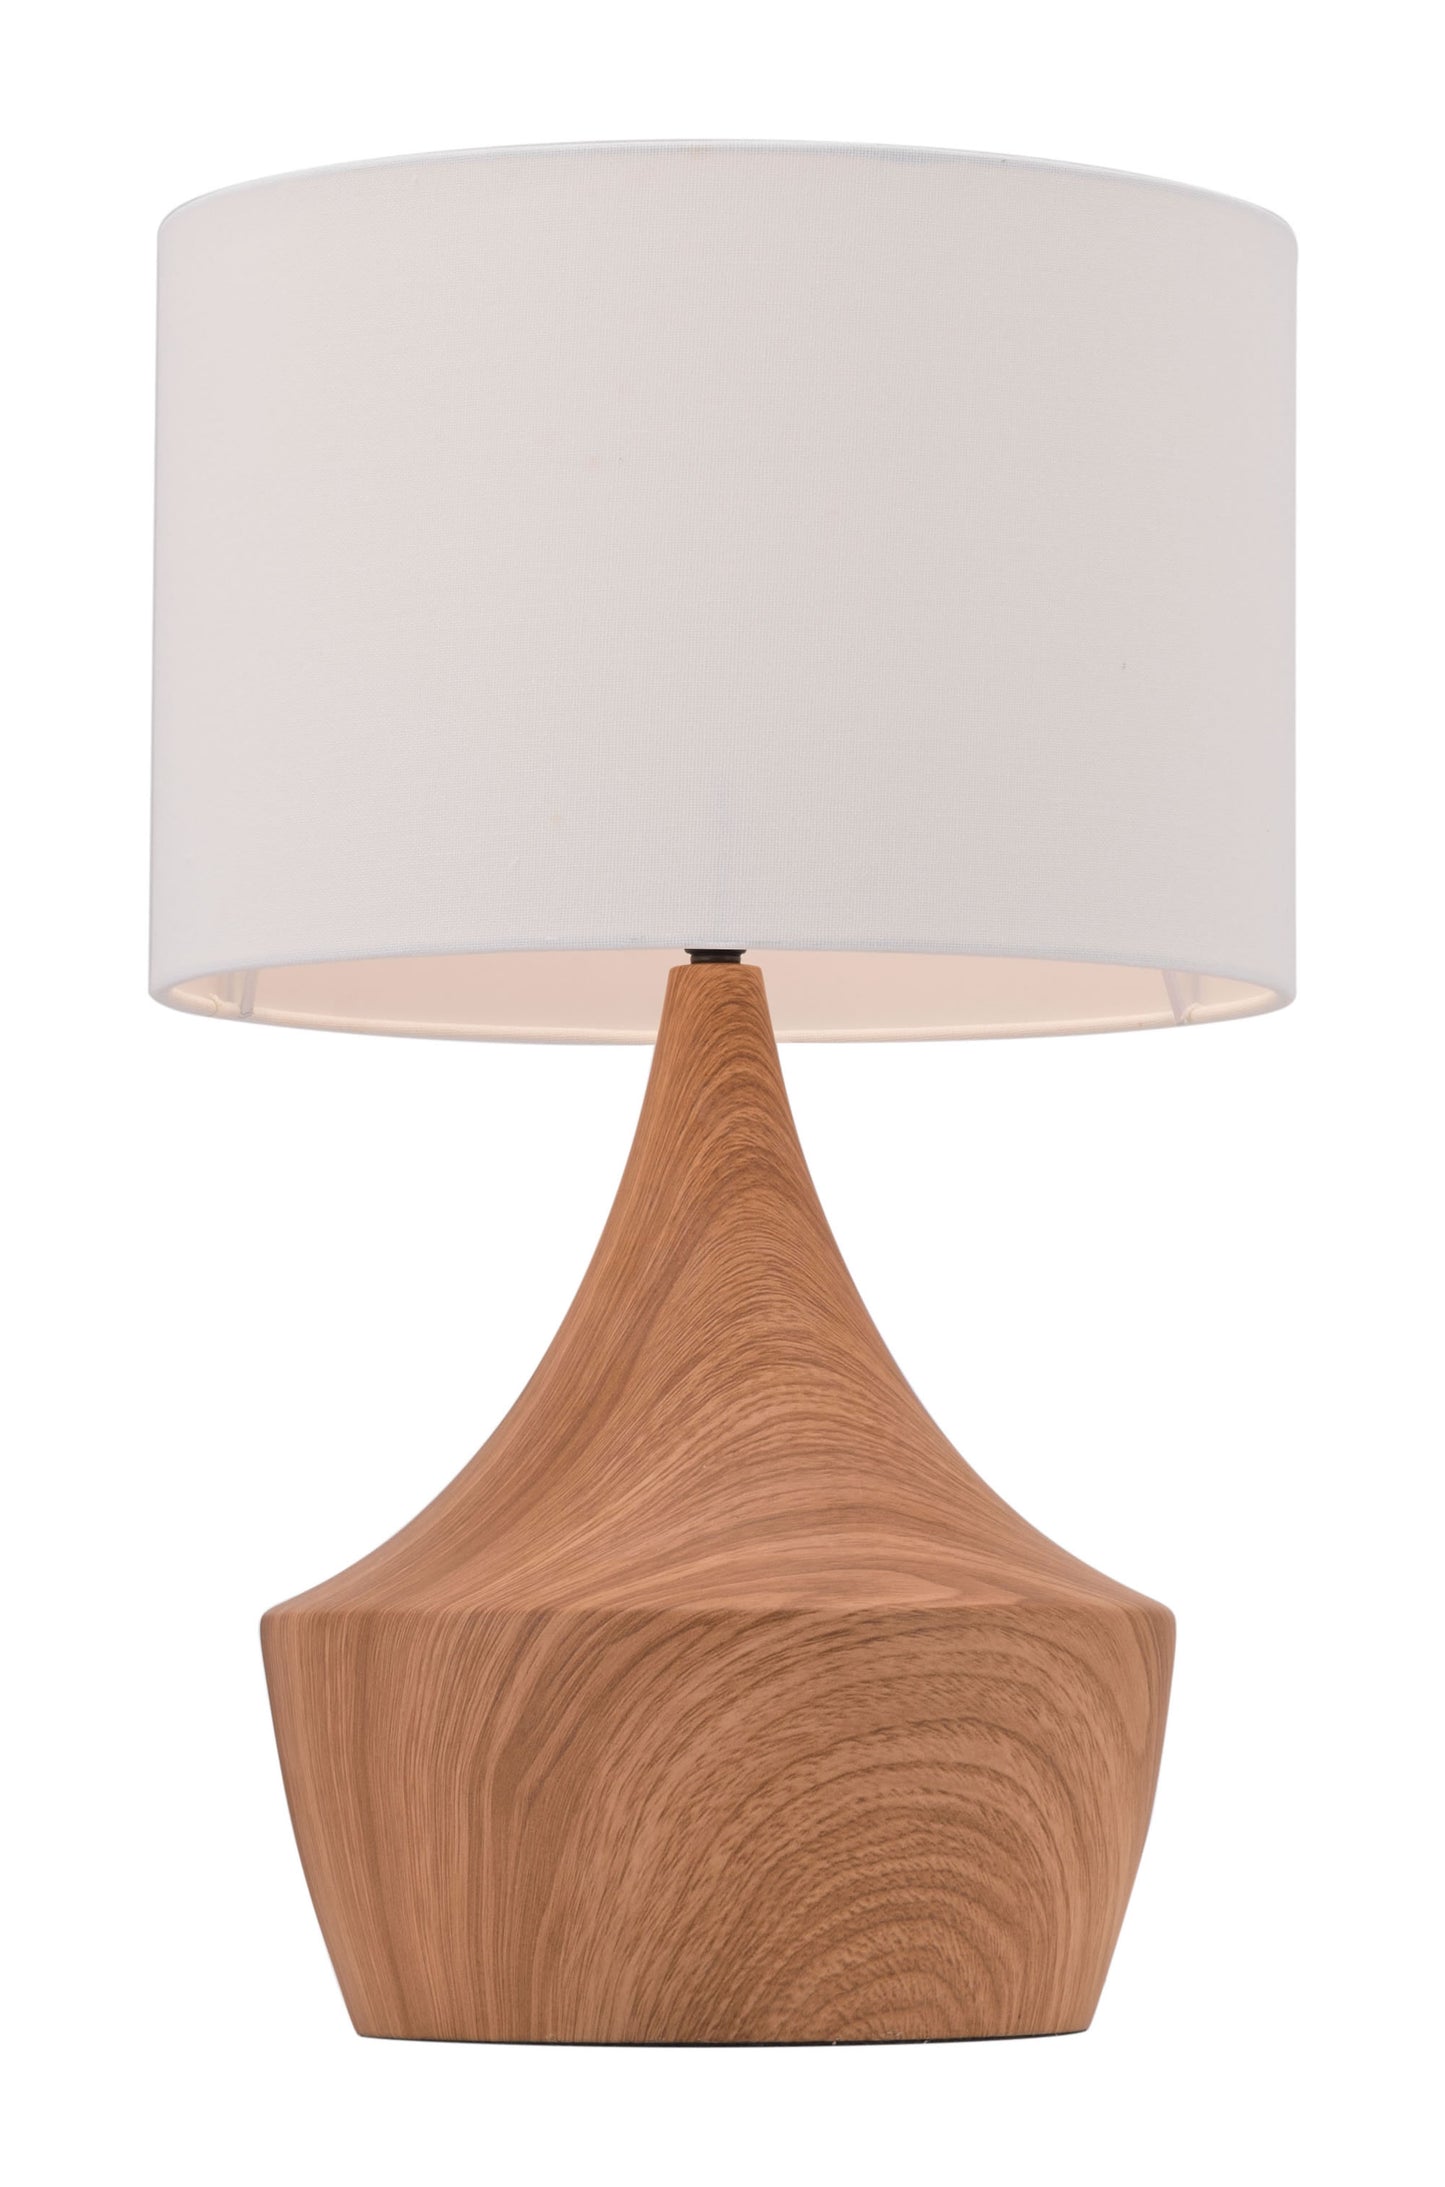 11.8" x 11.8" x 18.7" White &amp; Brown, Polyblend, Steel, Table Lamp